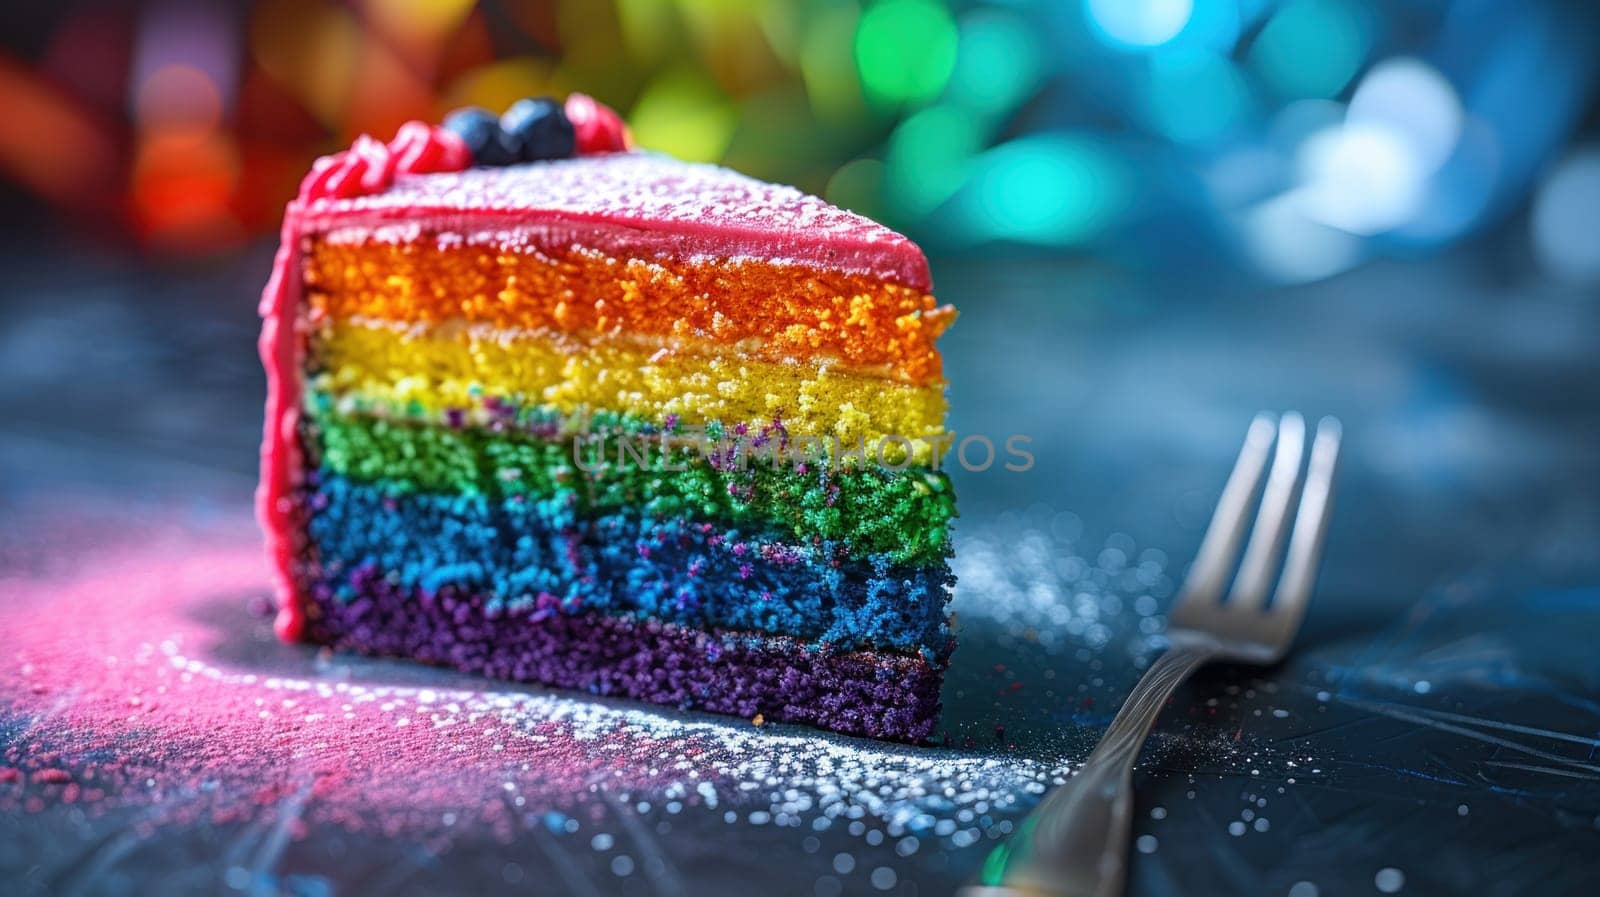 A slice of rainbow pride cake with pink frosting and sprinkles on a plate by golfmerrymaker